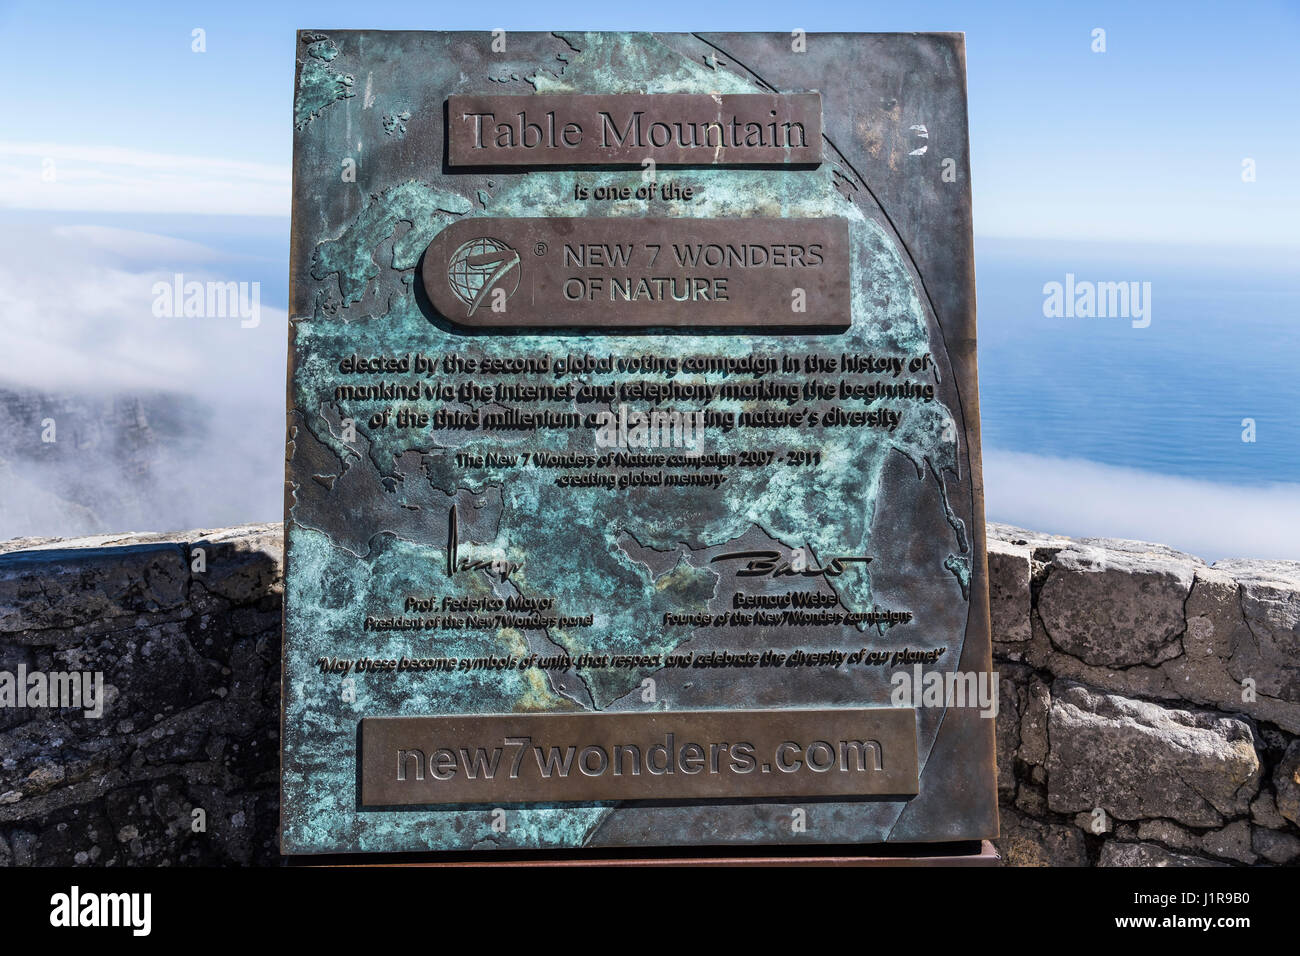 Information board, sign new 7 wonders, 7 Wonders of nature, Table Mountain, Cape Town, Western Cape, South Africa Stock Photo